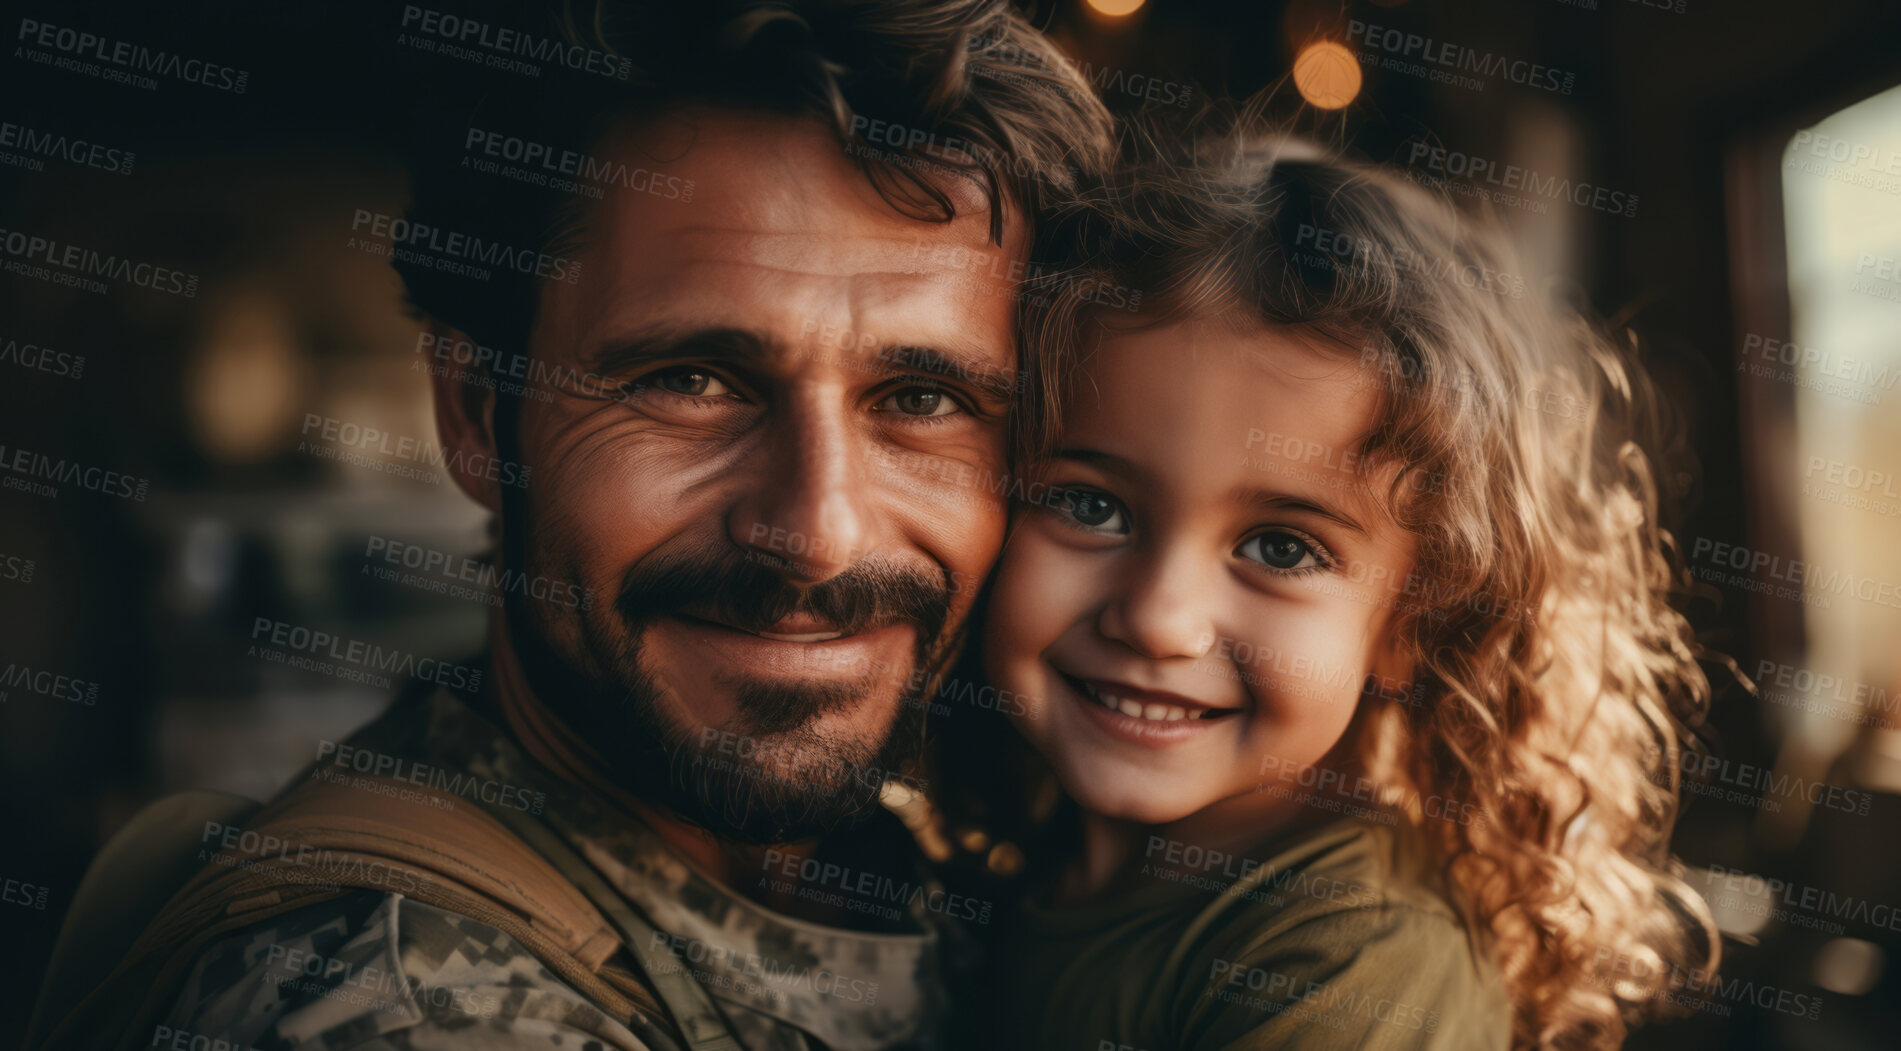 Buy stock photo Close-up portrait of soldier with child. Veteran homecoming concept.